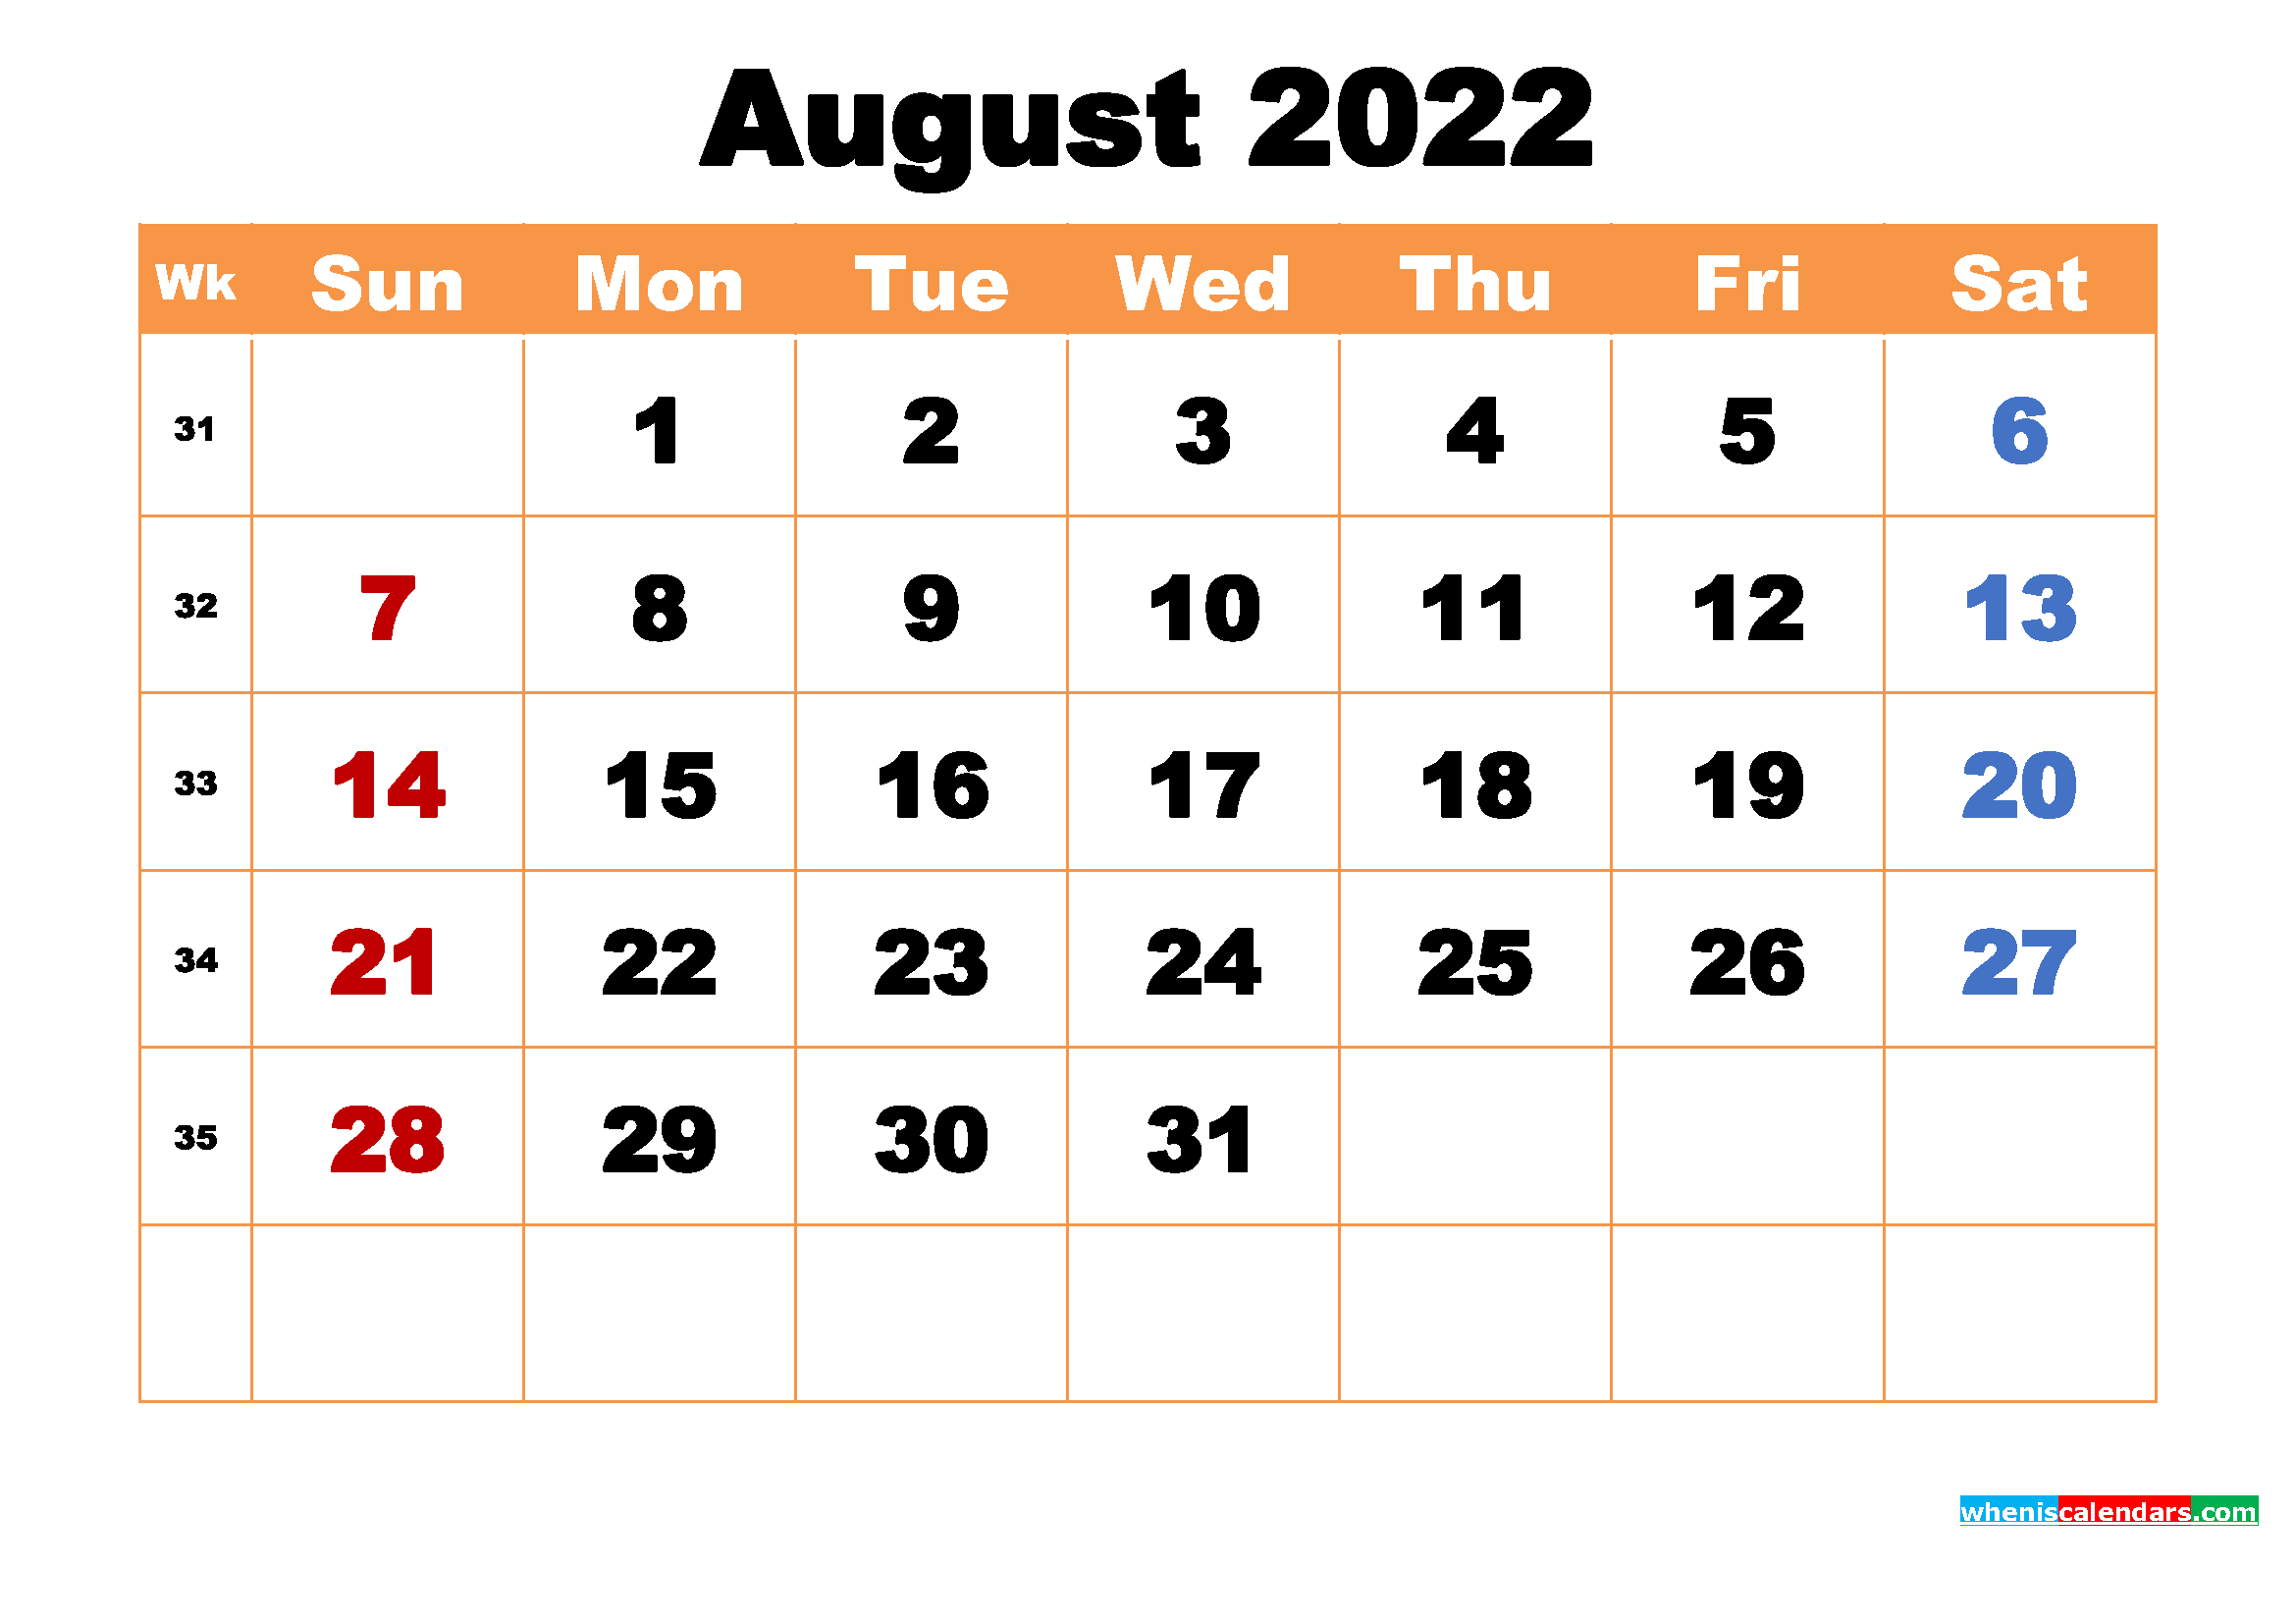 August 2022 Printable Monthly Calendar With Holidays  Free Printable with regard to August 2022 Printable Calendar